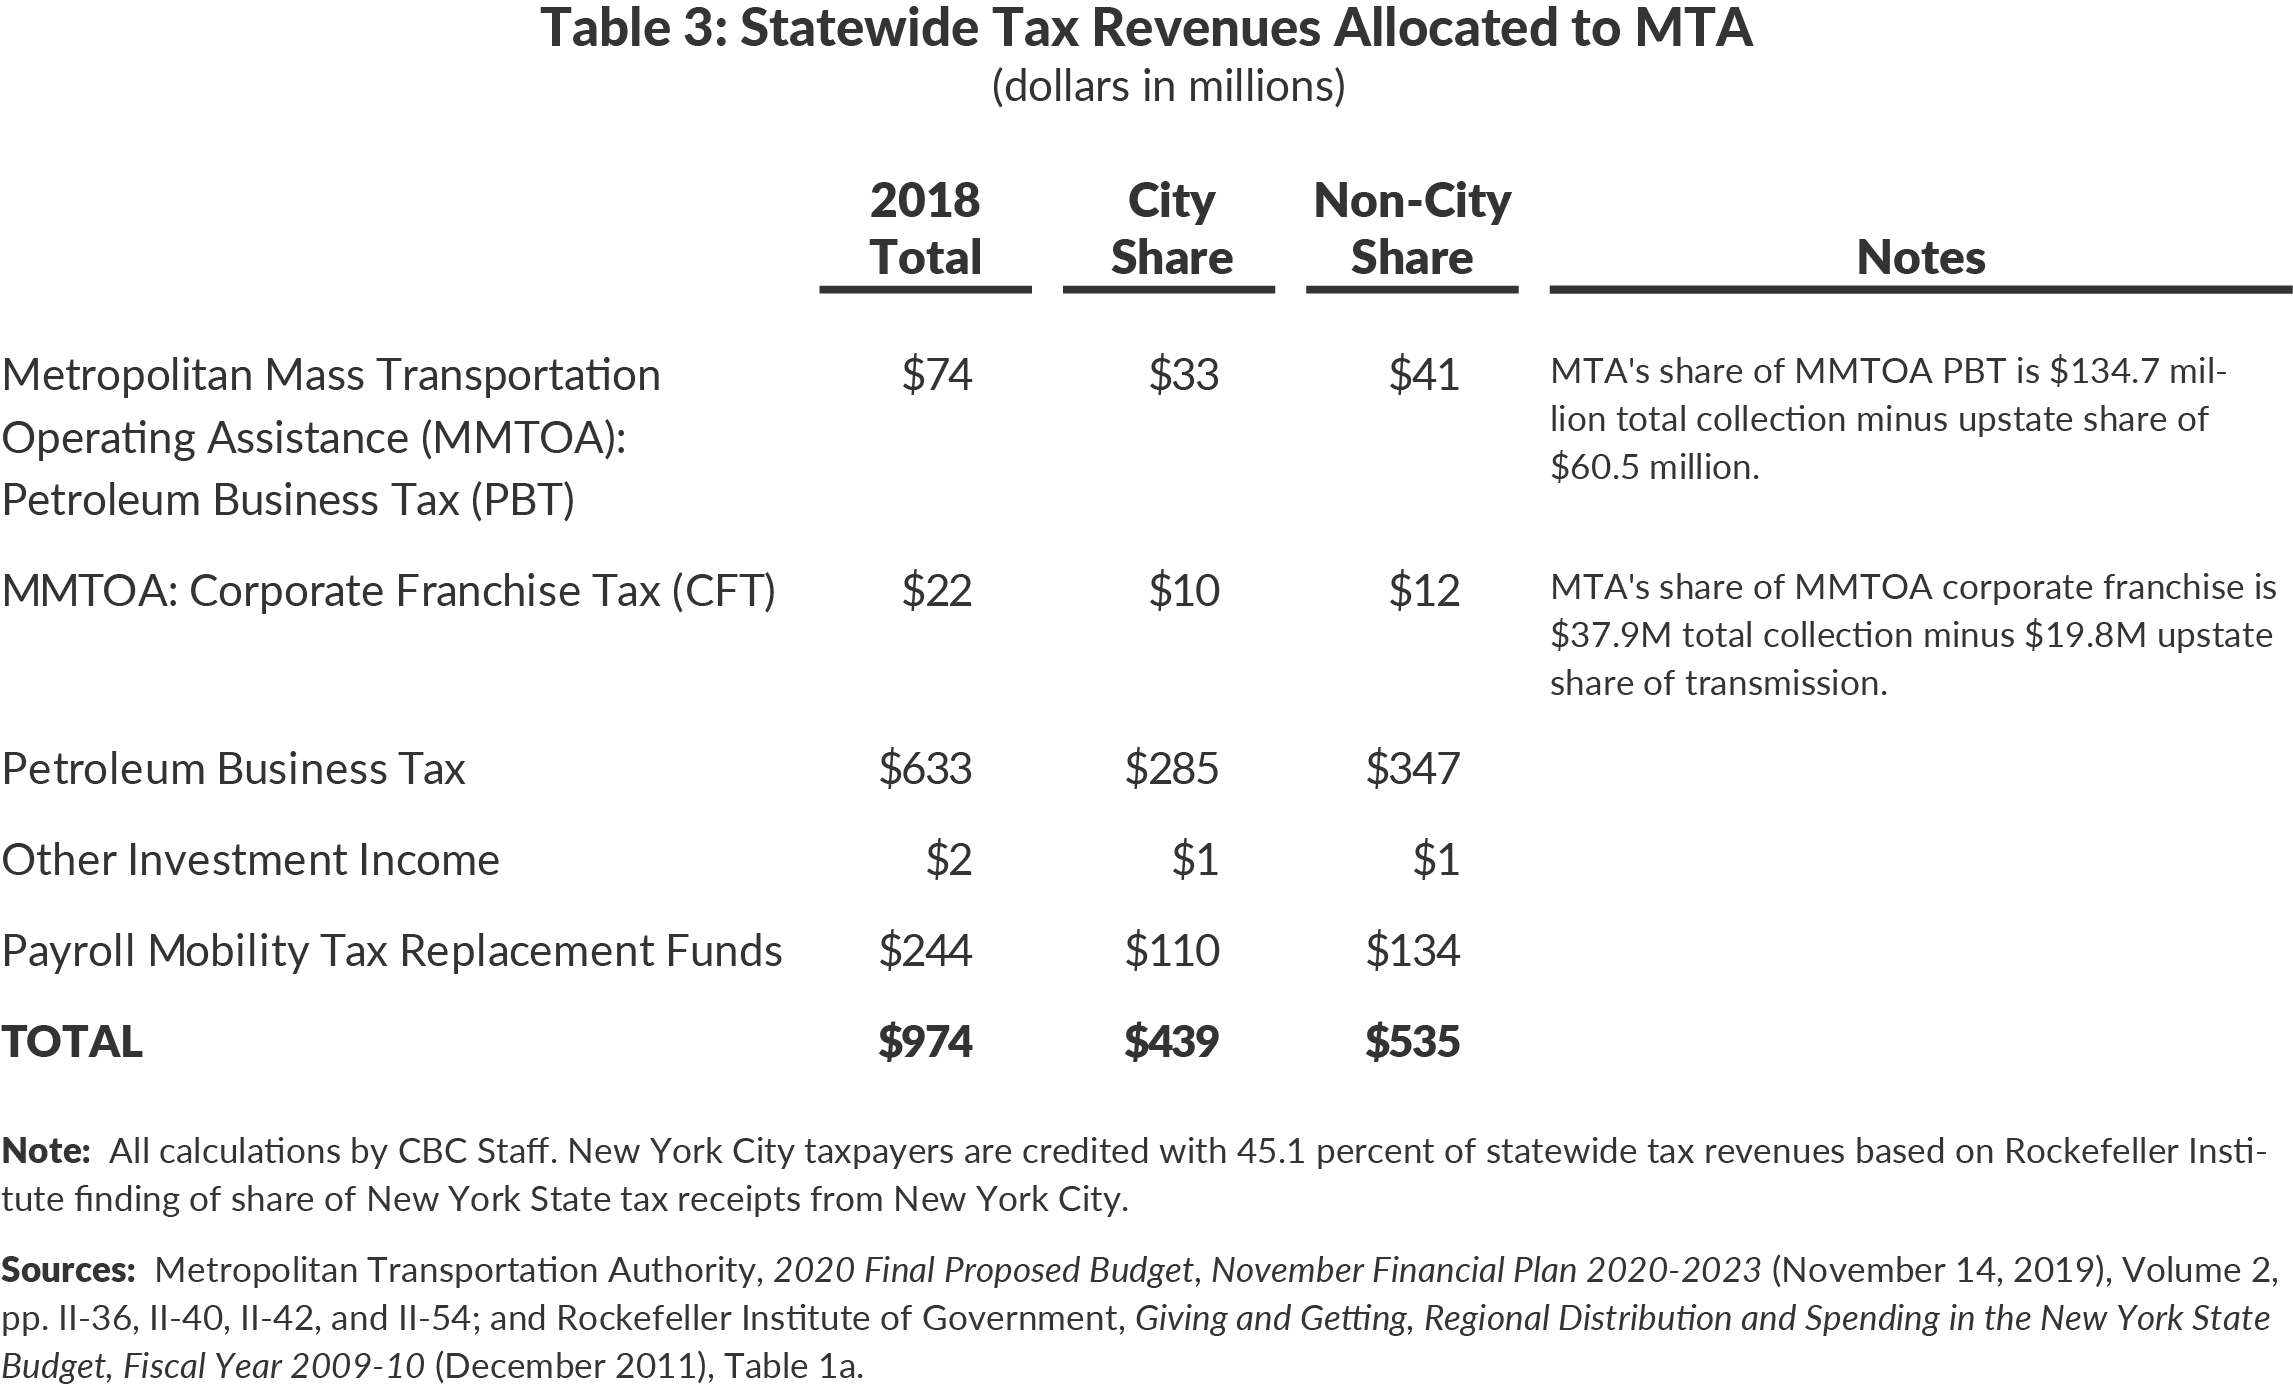 Table 3: Statewide Tax Revenues Allocated to MTA